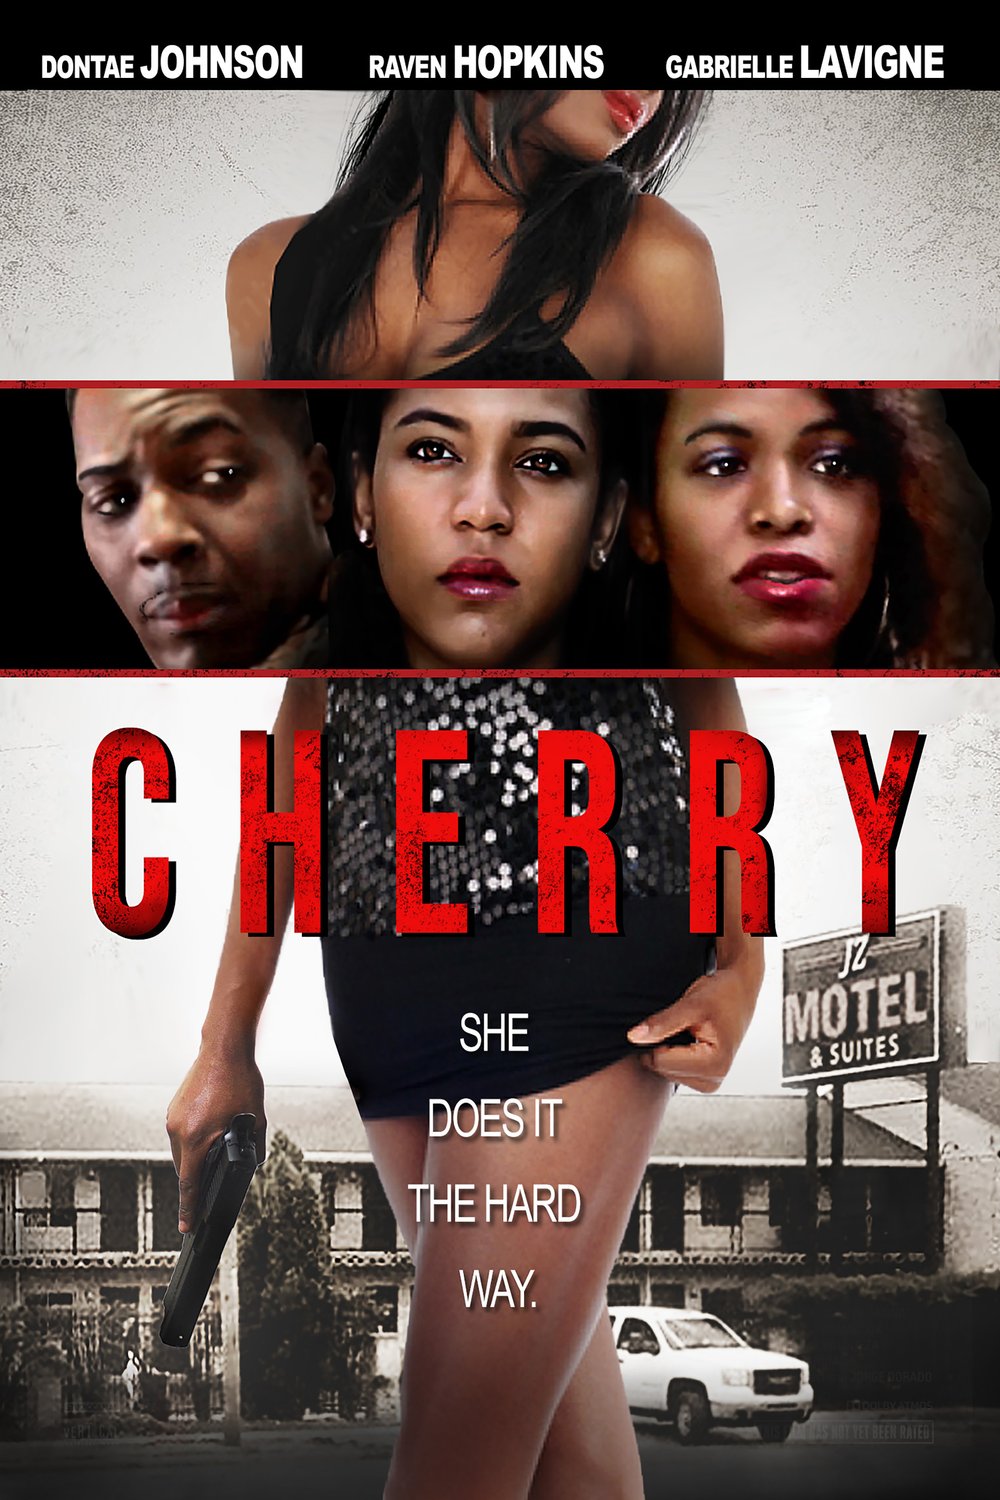 Poster of the movie Cherry